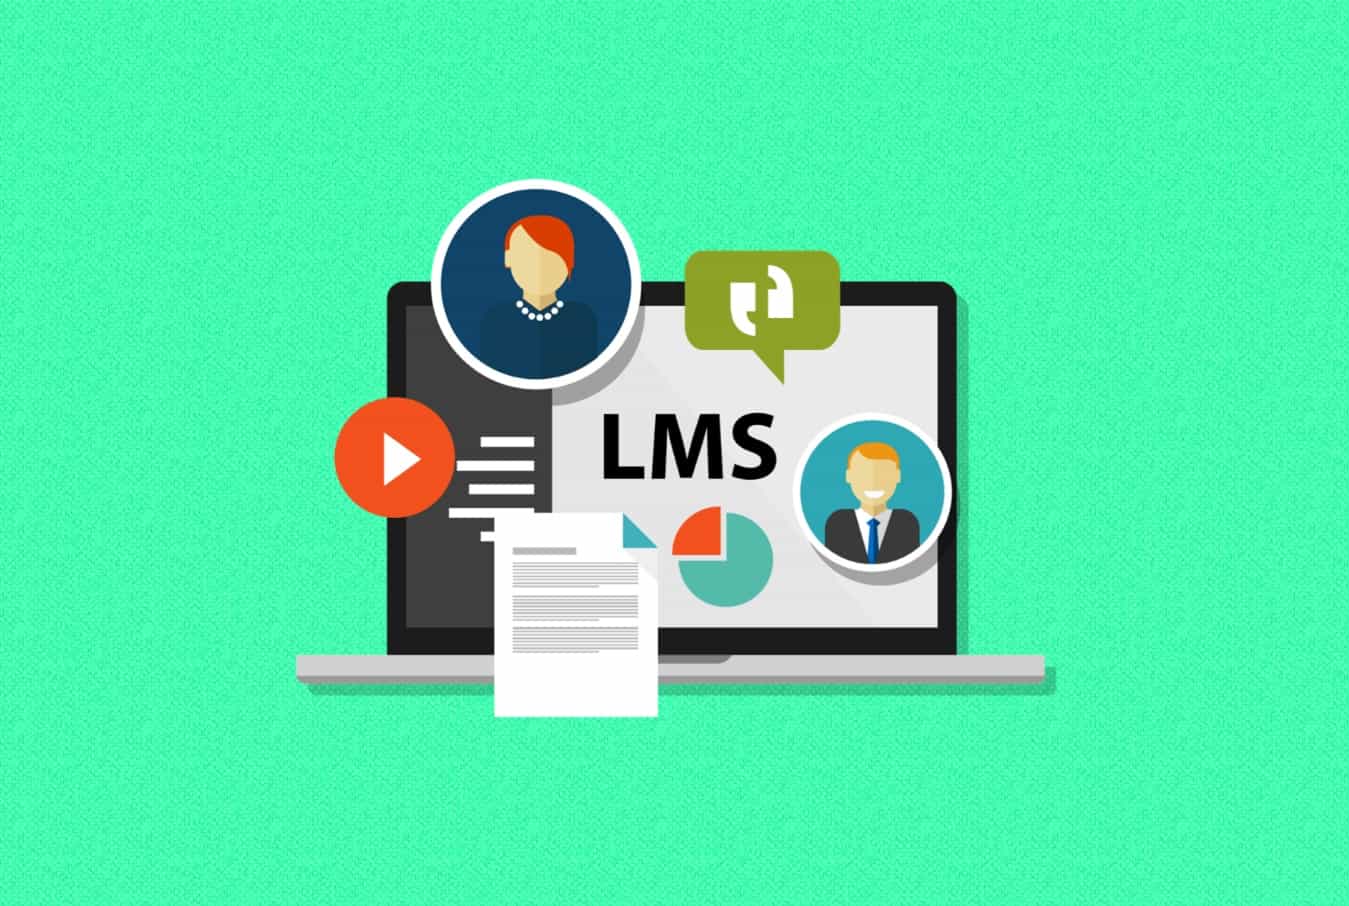 Top learning management system (LMS) software for small businesses